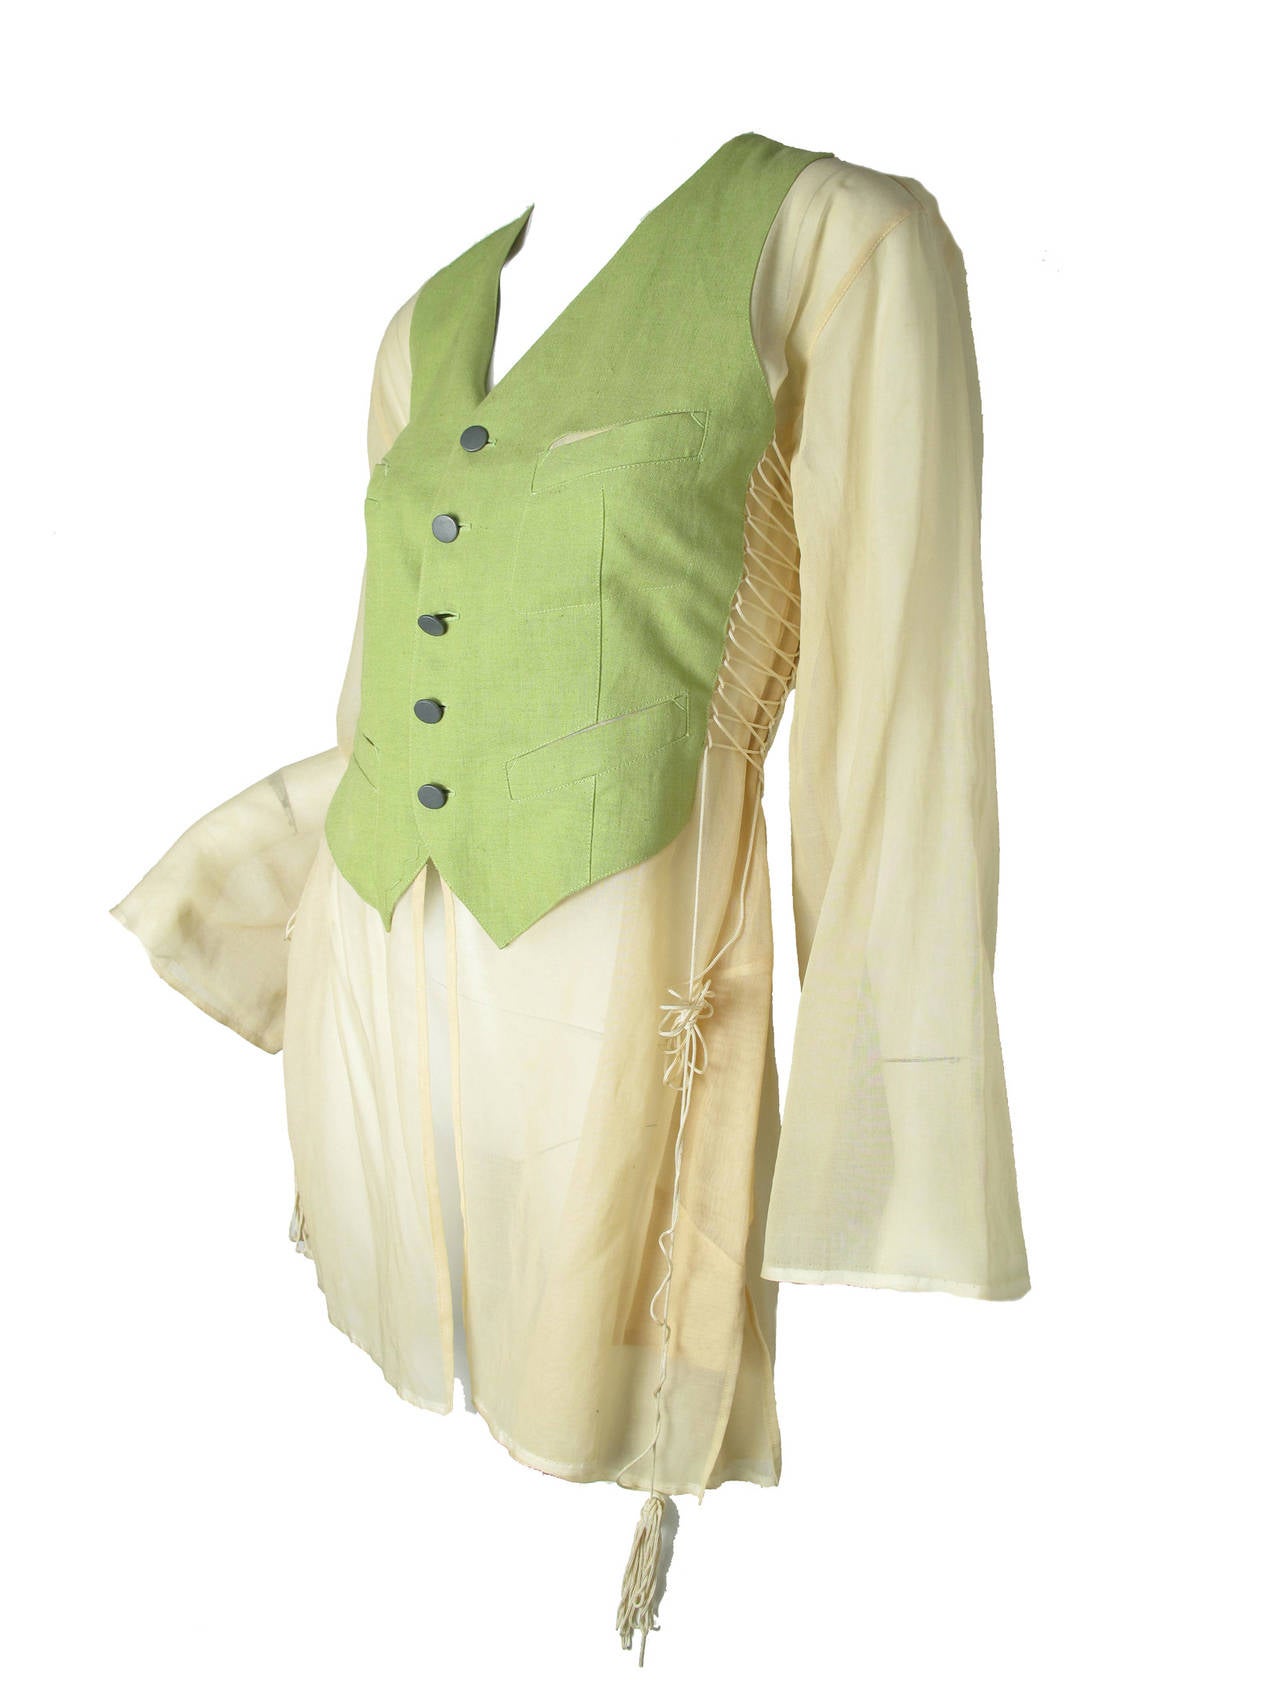 1990s Jean Paul Gaultier cream sheer blouse with attached green linen vest. Lacing on sides can be loosened. 32